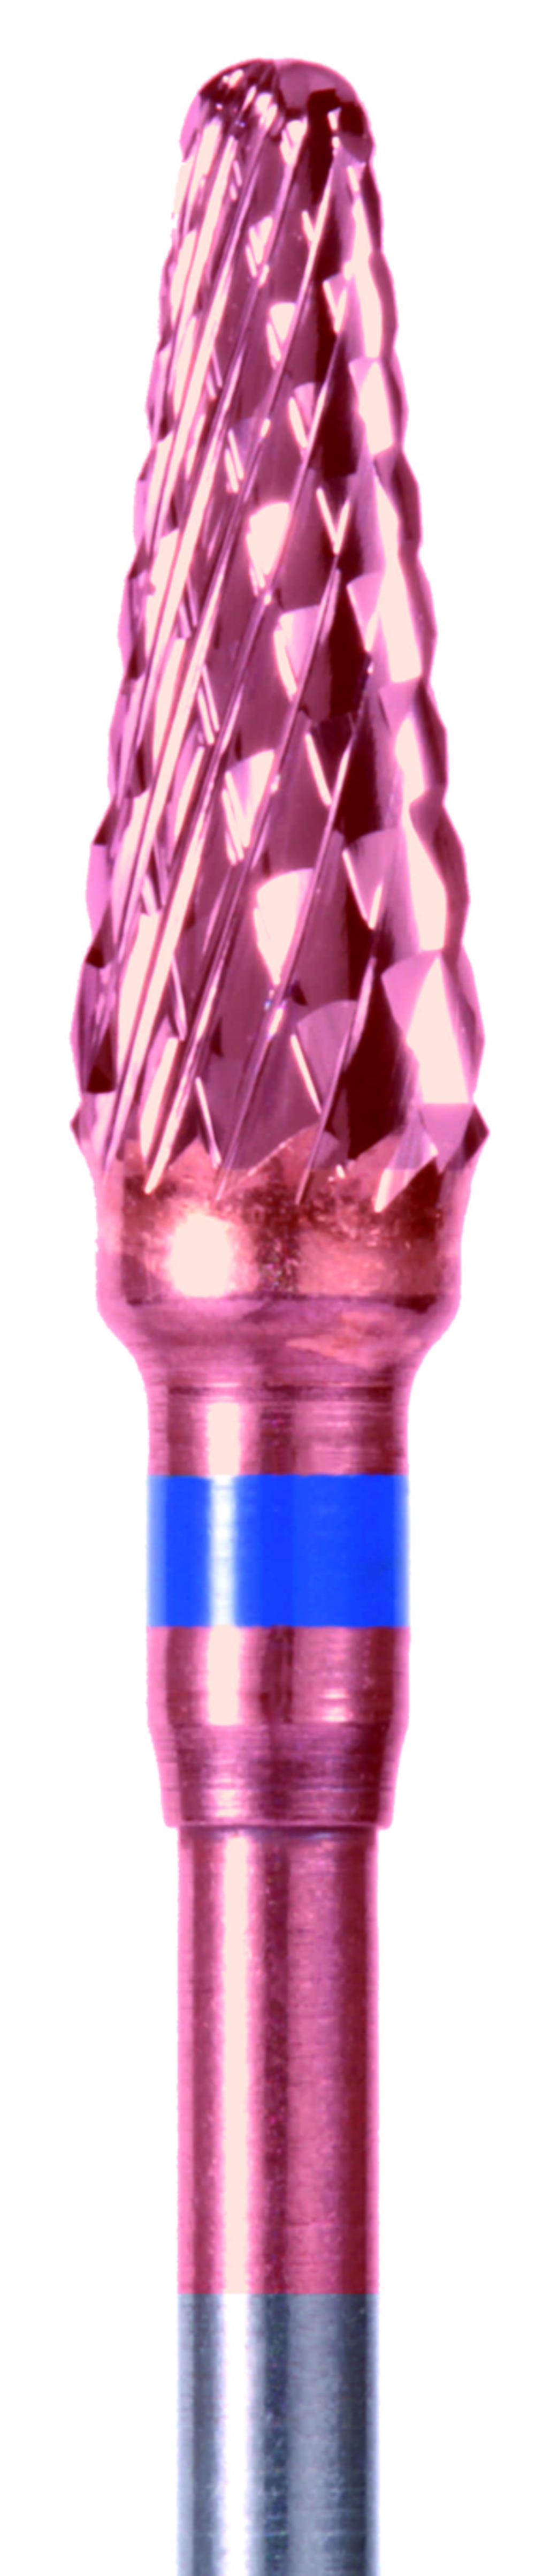 M+W SELECT Red Milling Cutter